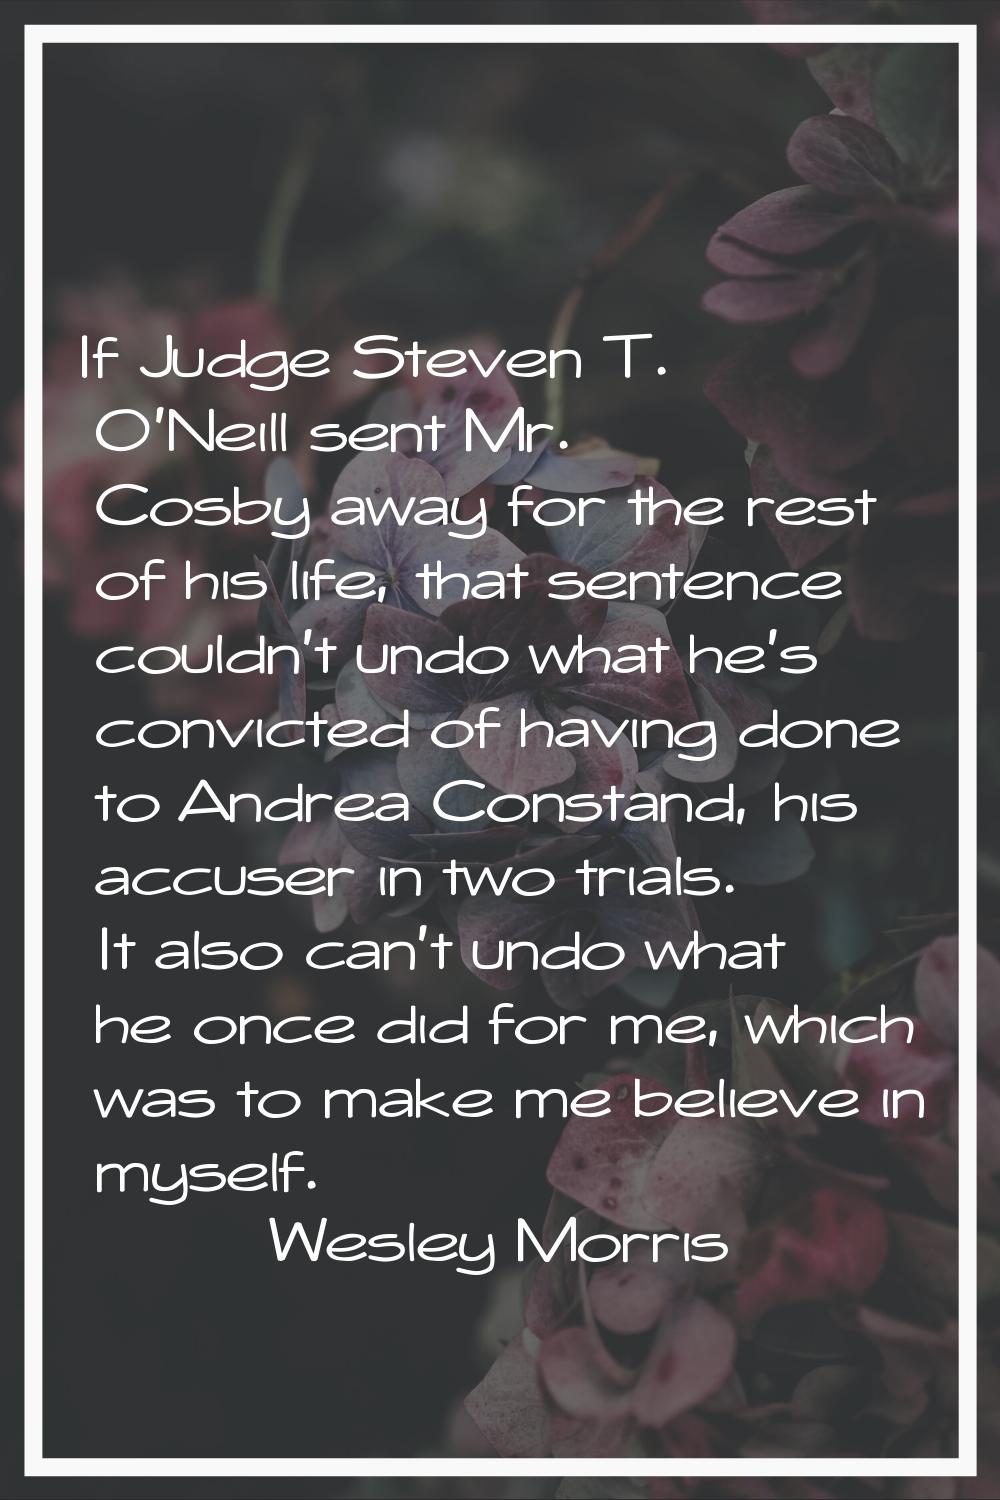 If Judge Steven T. O'Neill sent Mr. Cosby away for the rest of his life, that sentence couldn't und